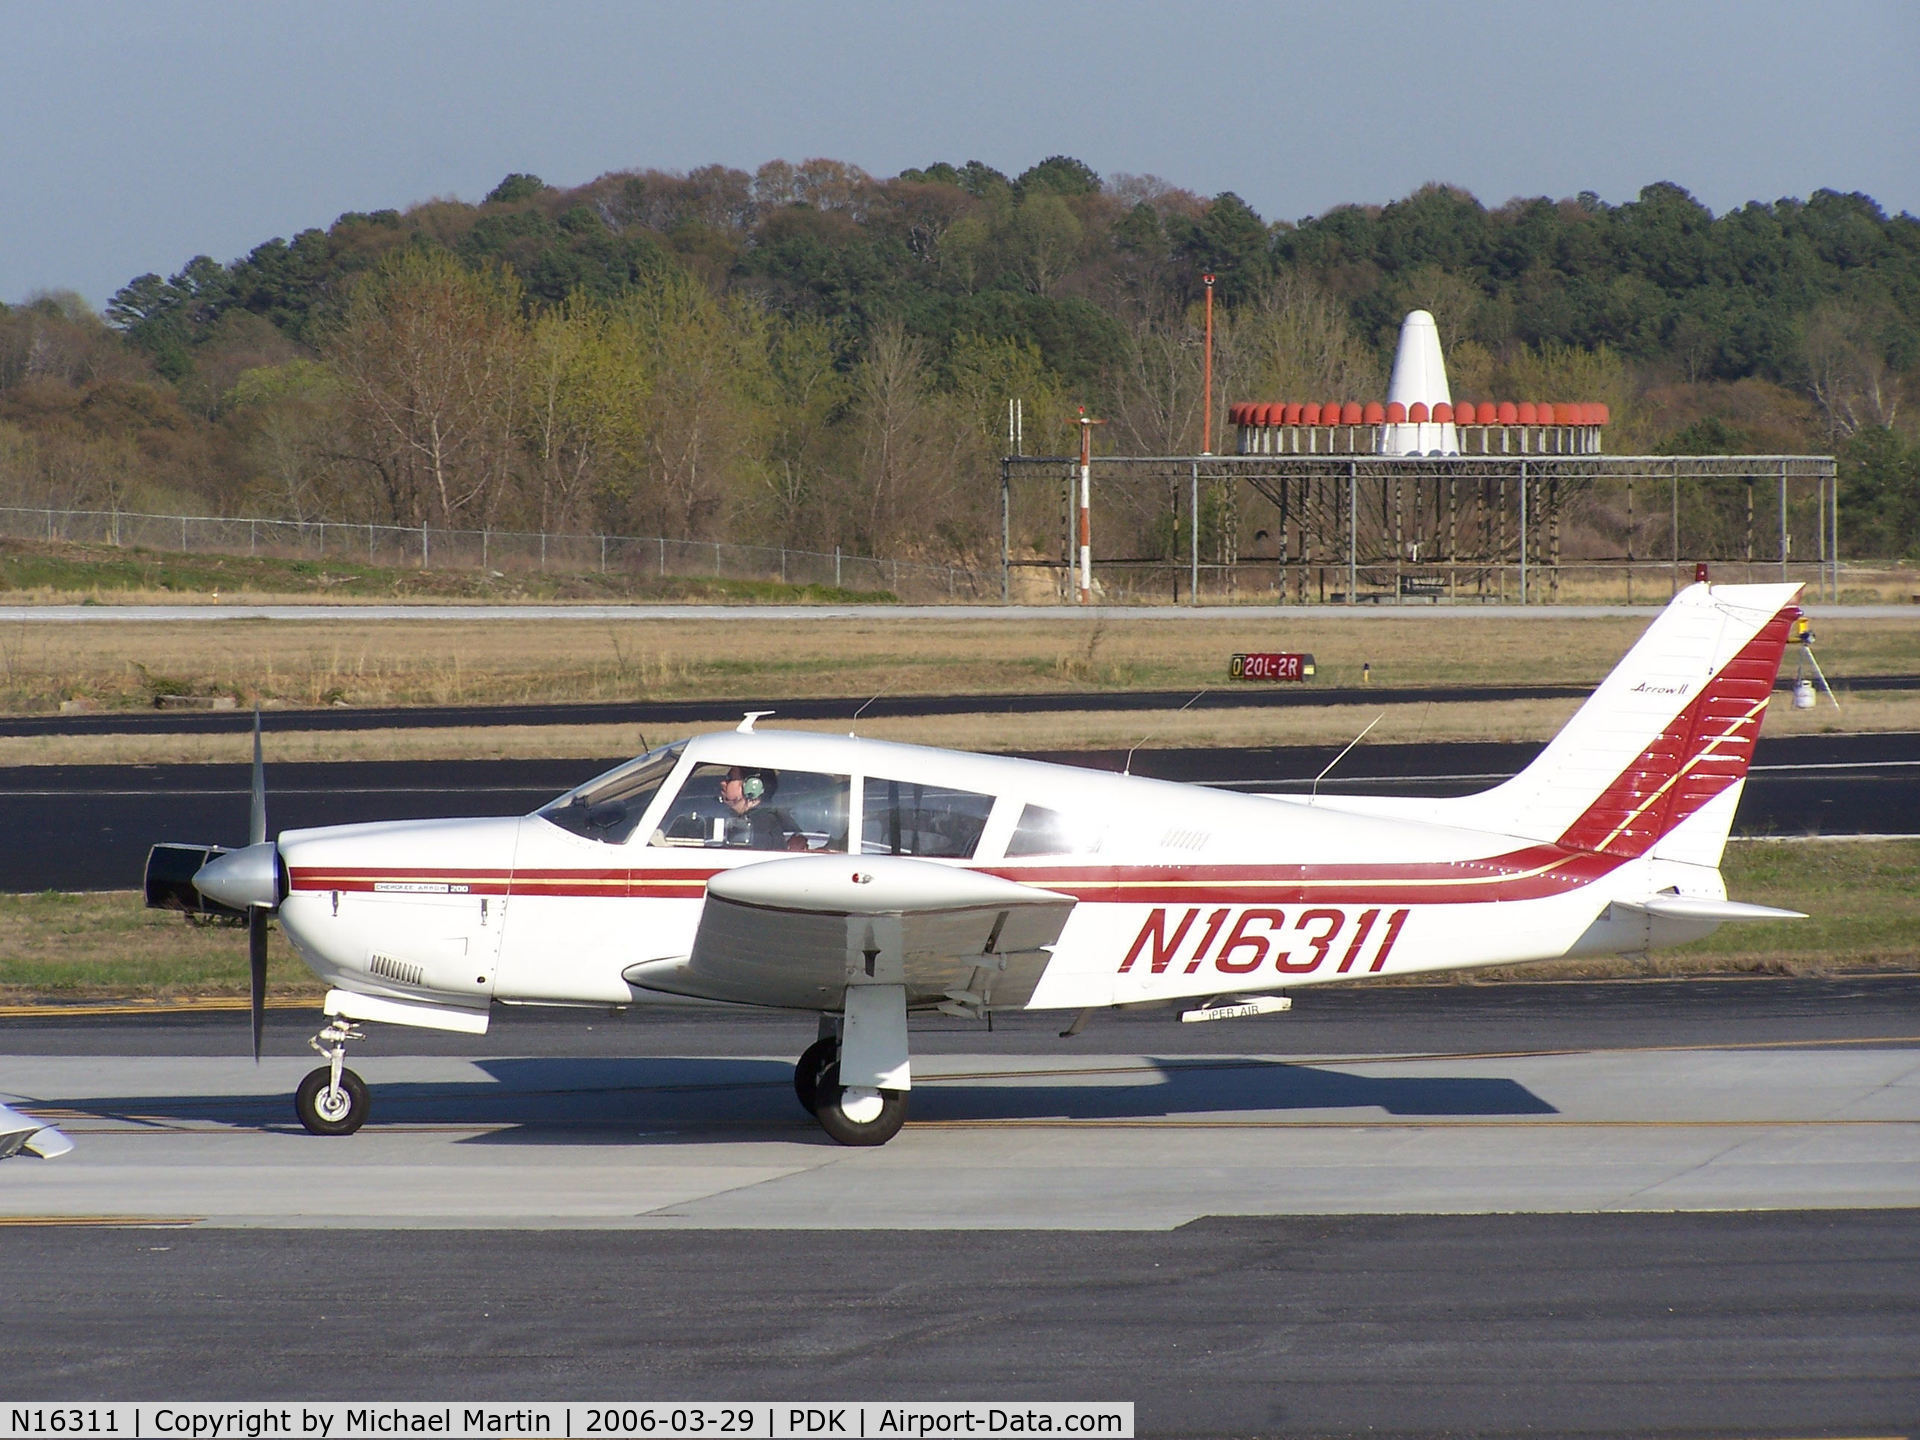 N16311, 1973 Piper PA-28R-200 C/N 28R-7335124, Taxing back from flight